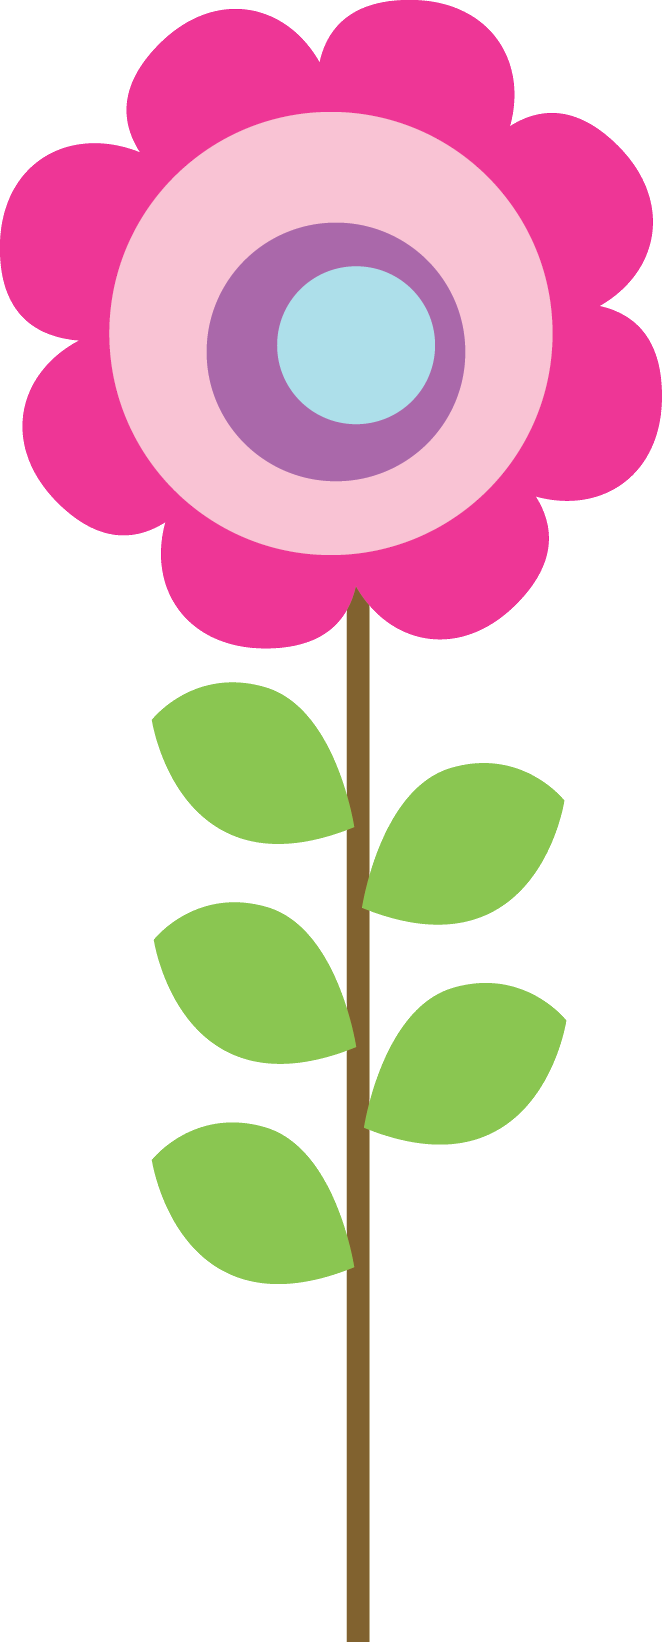 Say Hello - Pastel Flower Clipart Png (662x1642)